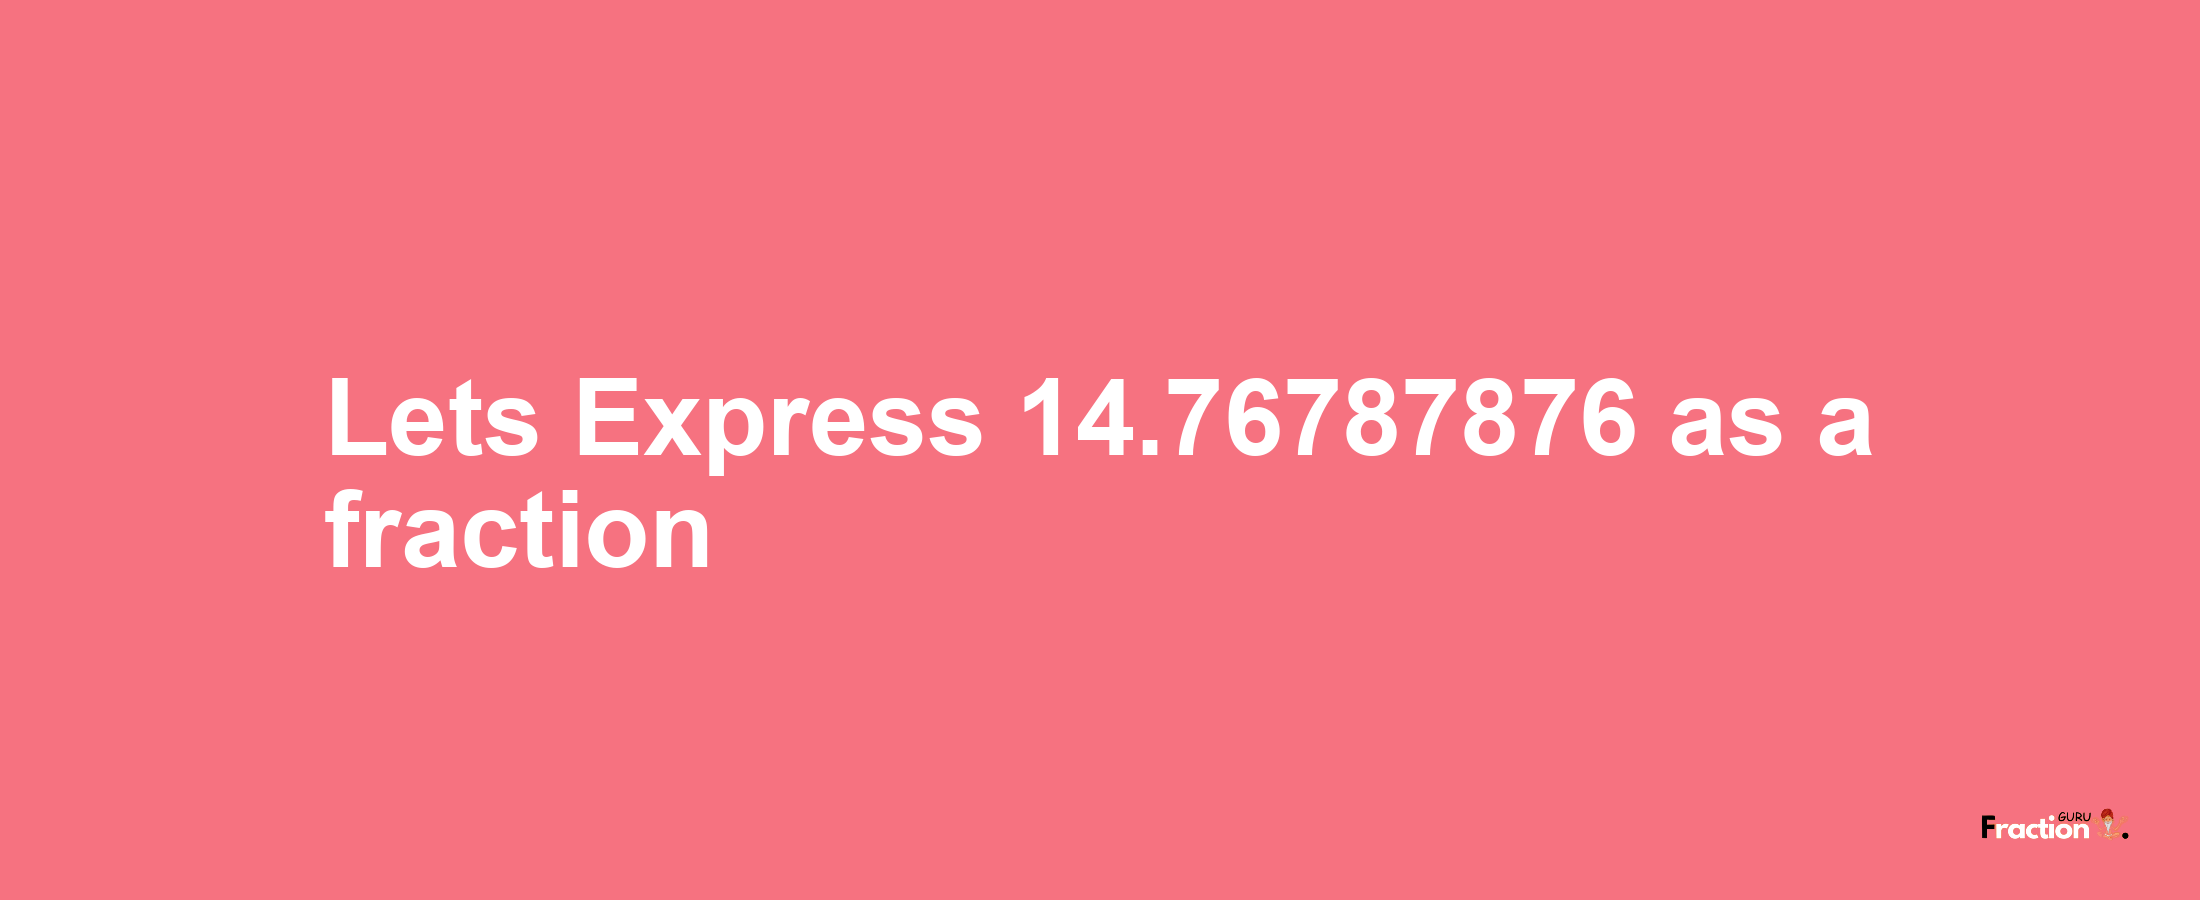 Lets Express 14.76787876 as afraction